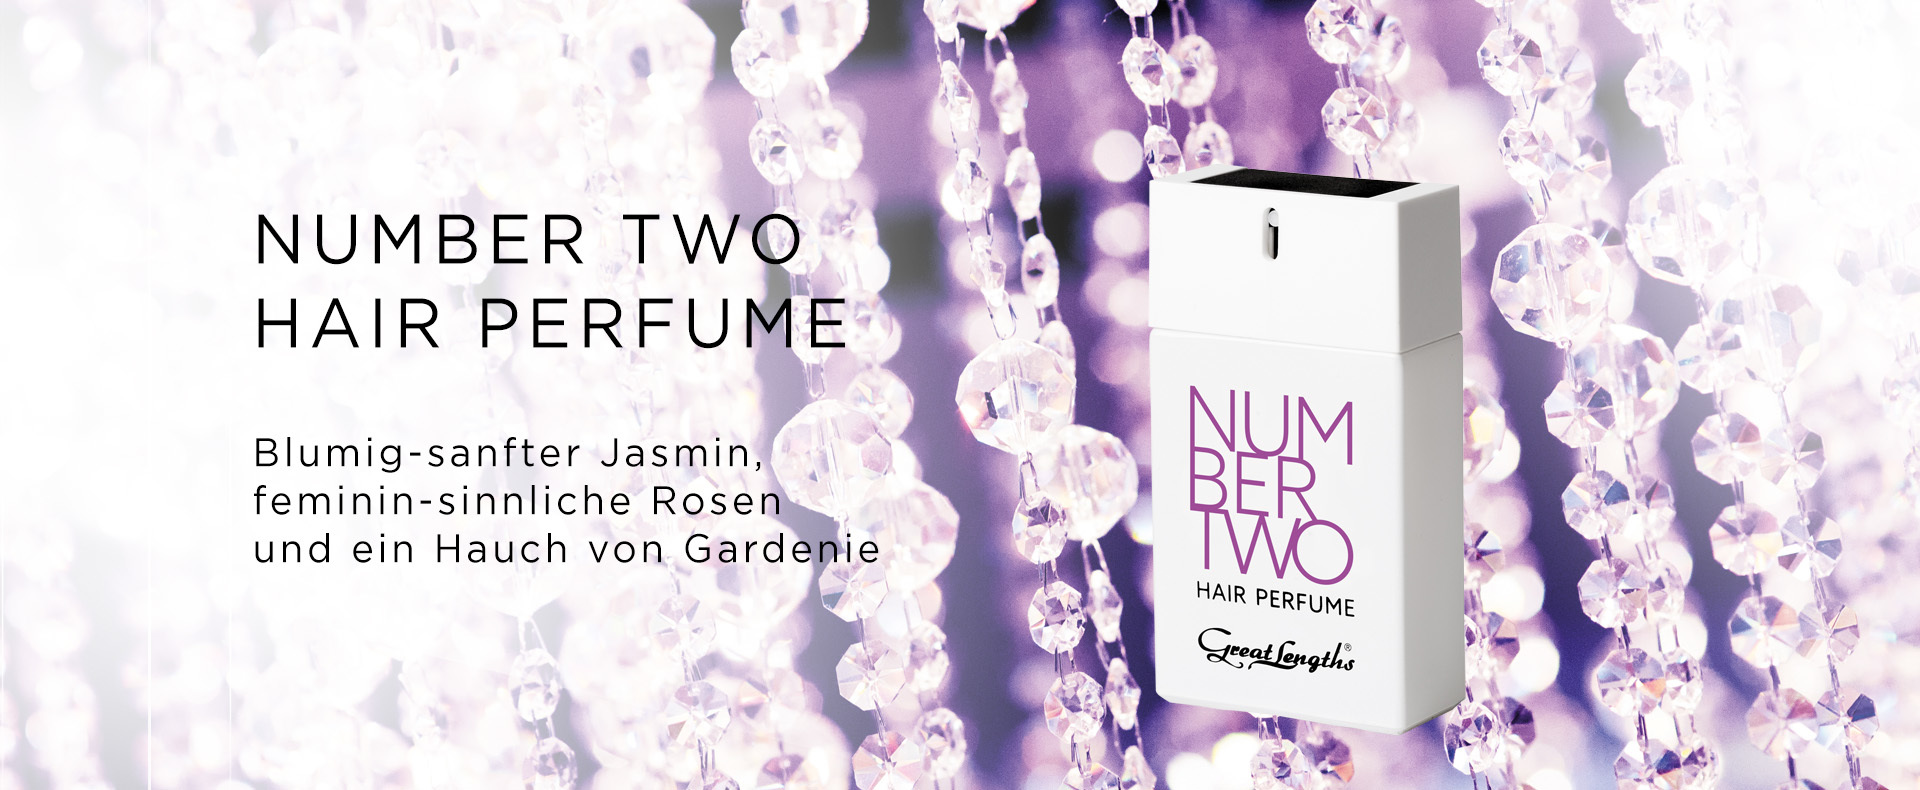 NUMBER TWO - Hair Perfume (© Great Lengths)